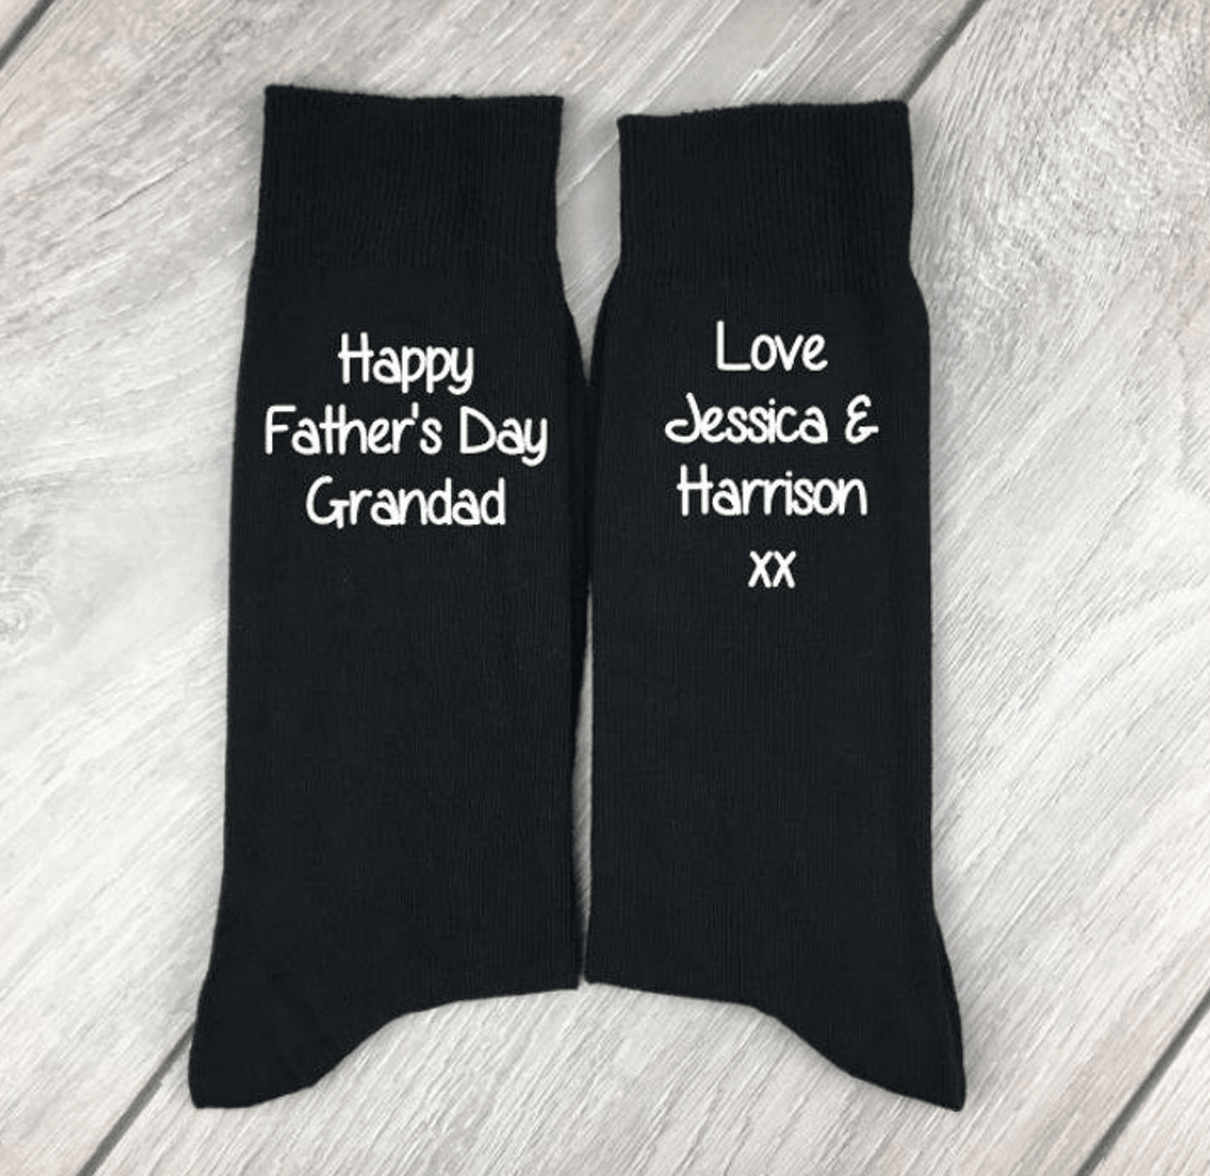 Personlised fathers day socks for grandad - Robes 4 You